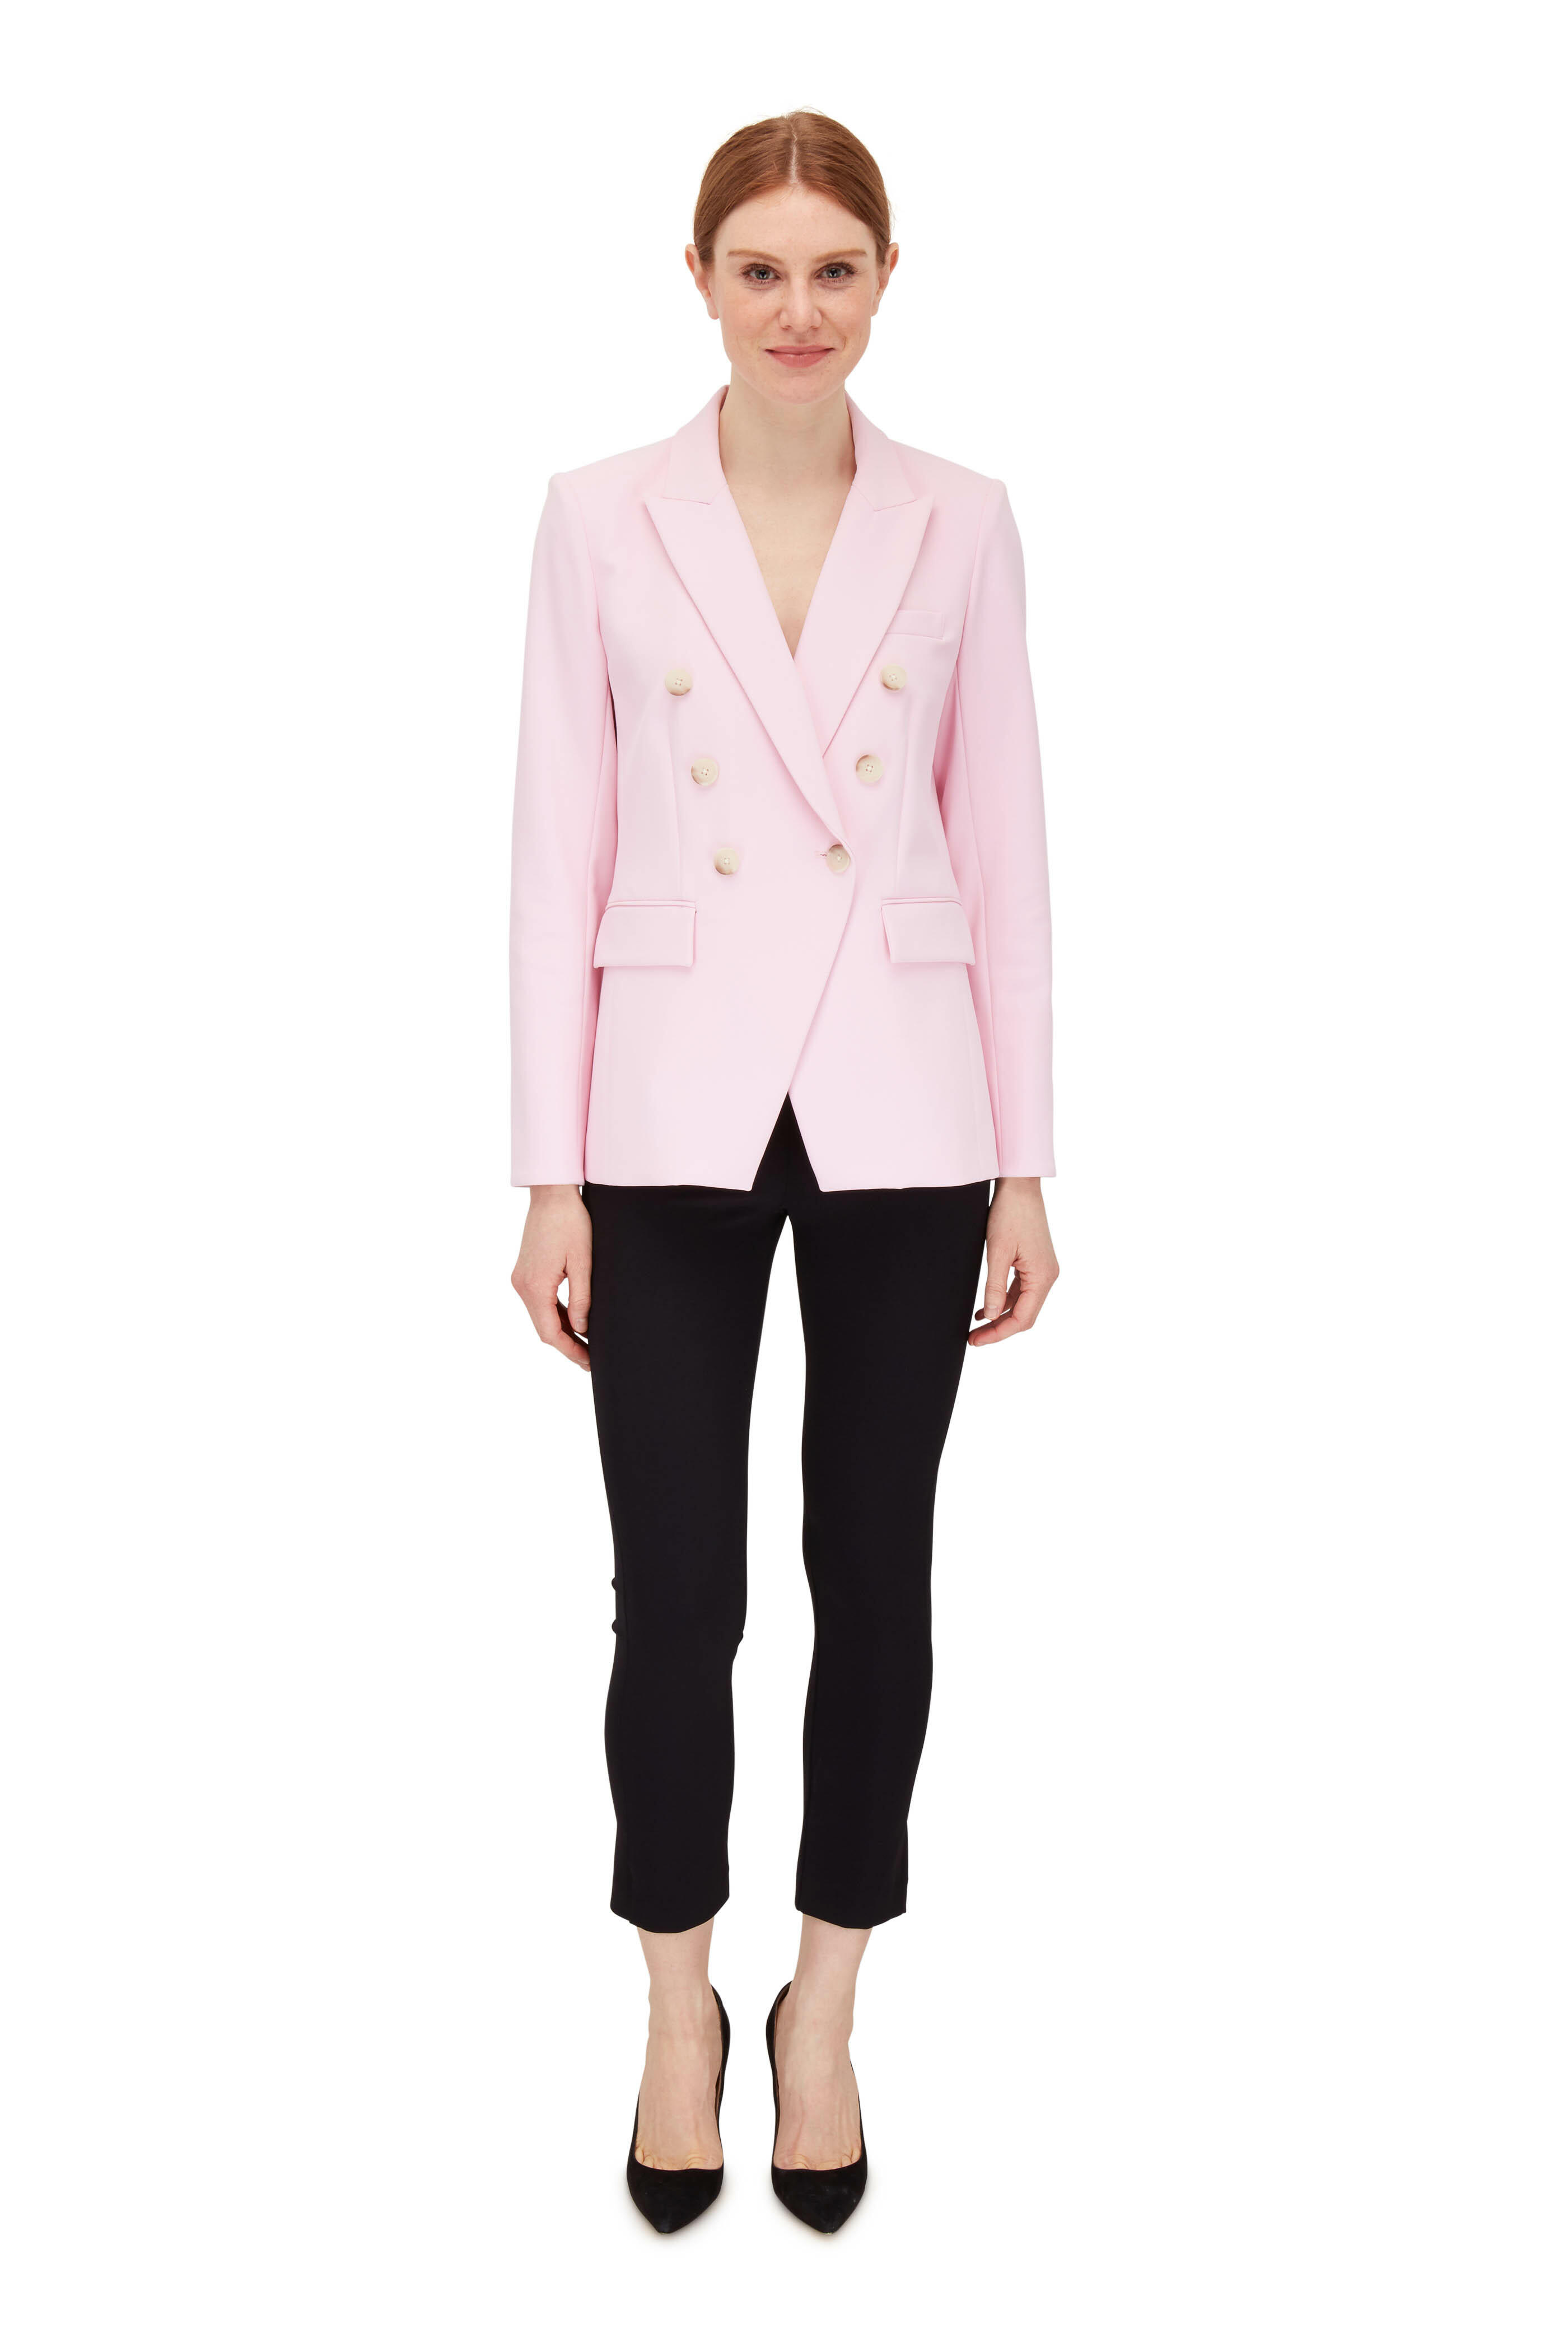 Veronica Beard - Lonny Ice Pink Dickey Jacket | Mitchell Stores